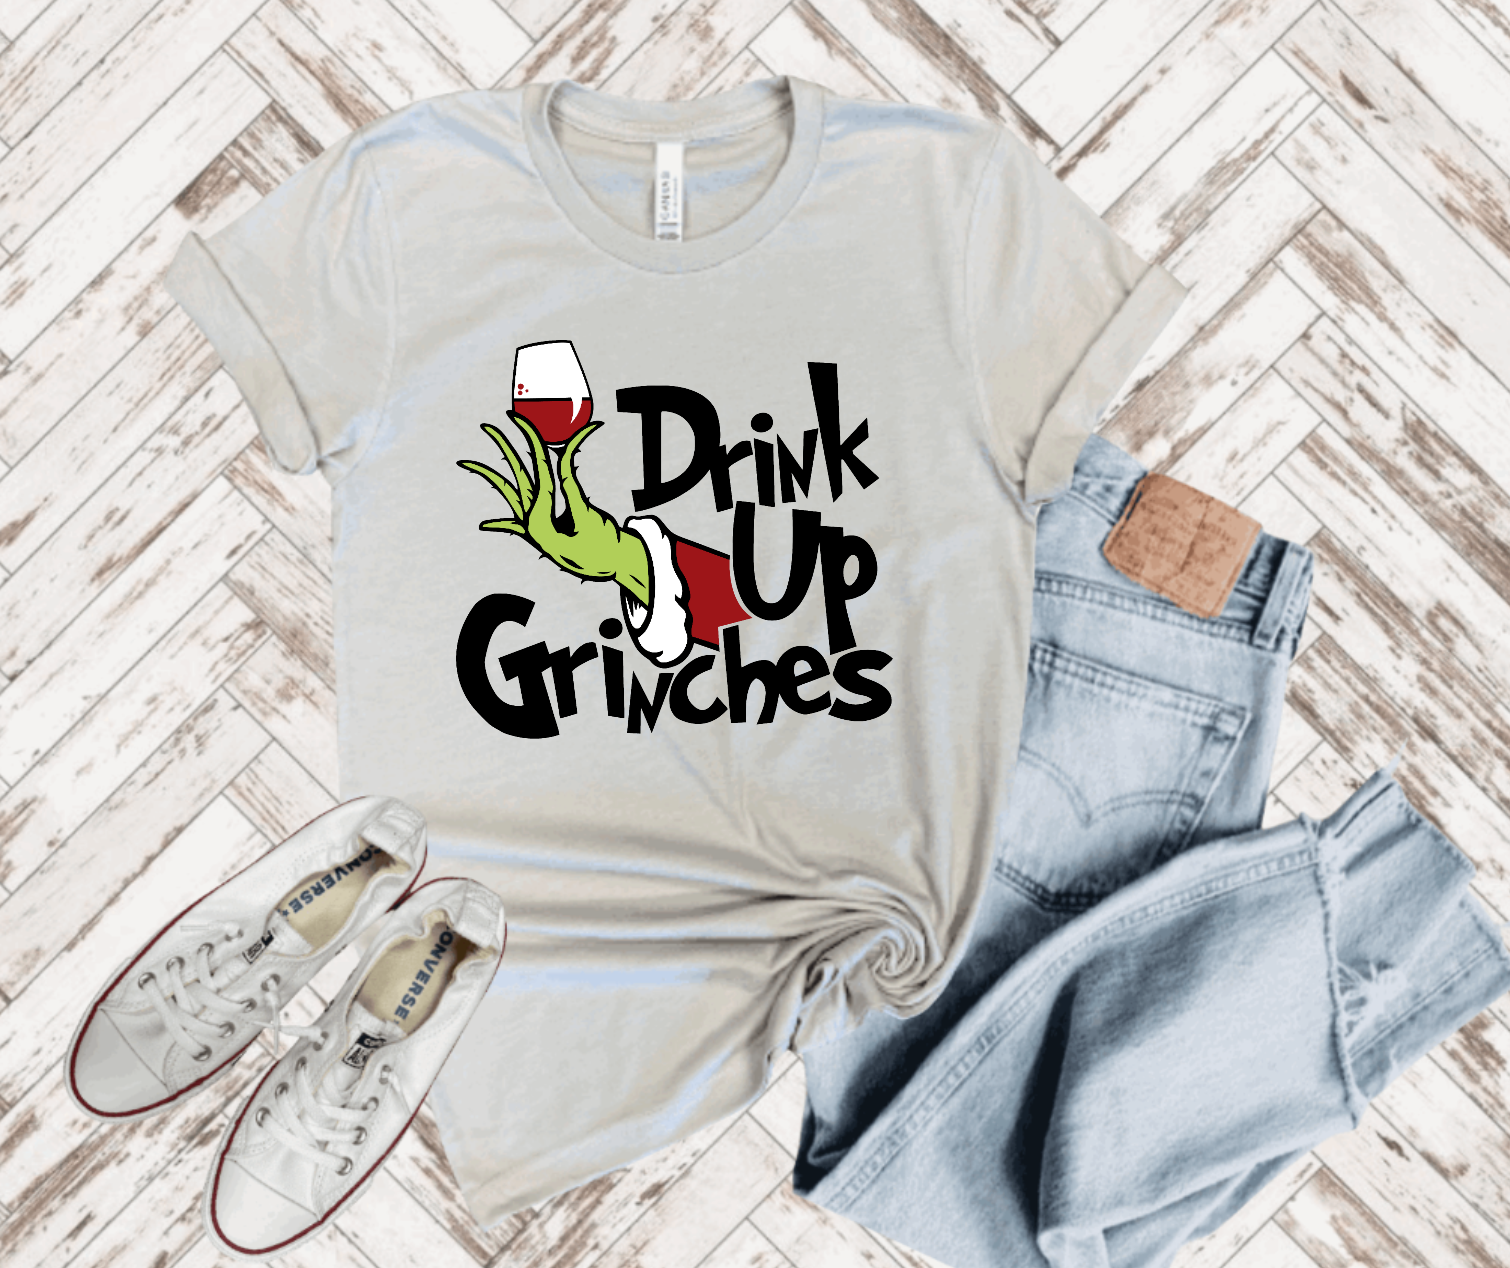 Drink up Grinches - Christmas Tee